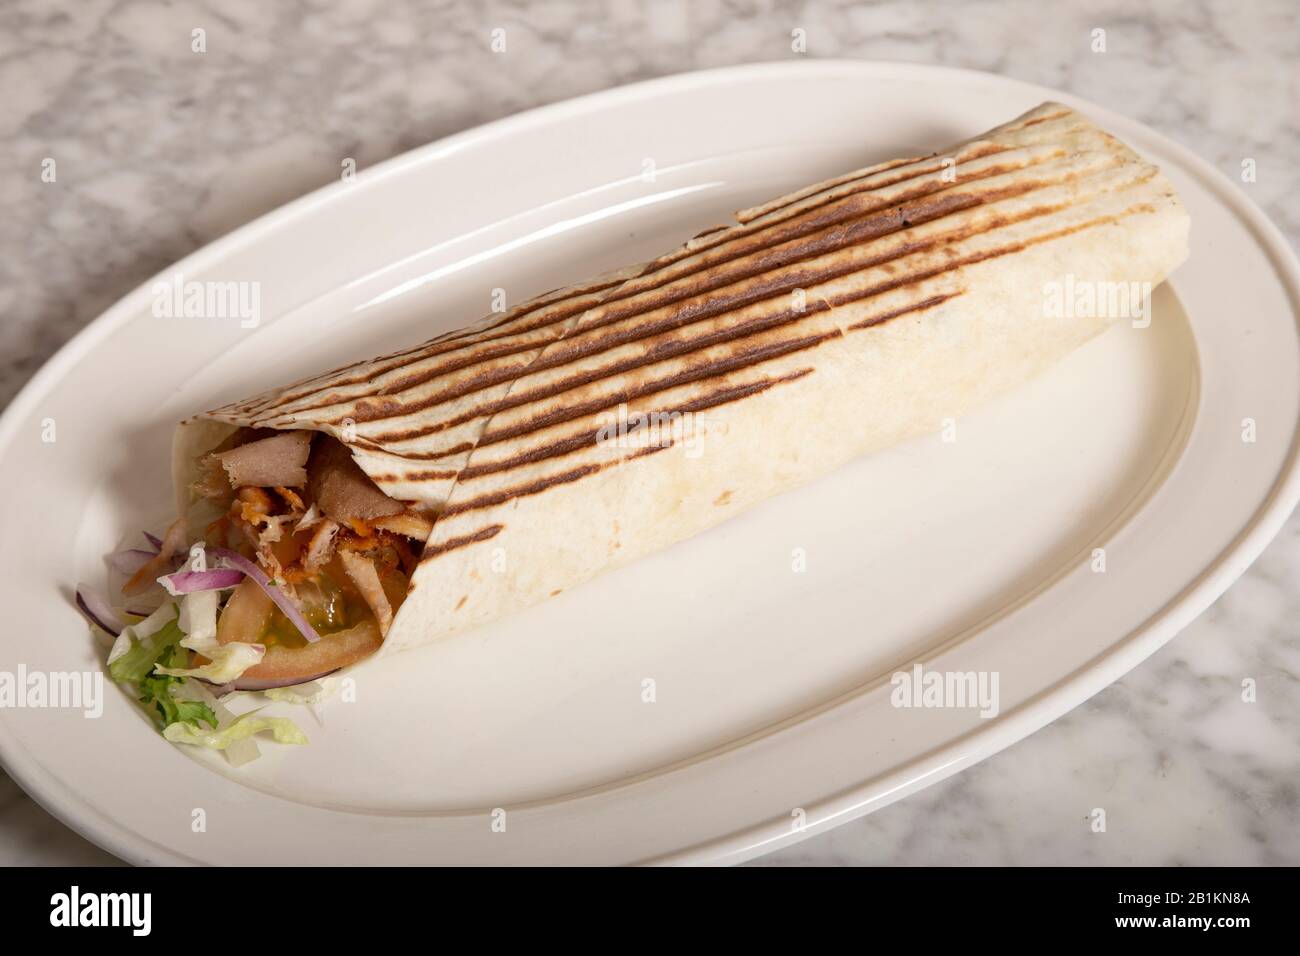 Durum kebab in hard bread served on plate on white marble table. Stock Photo